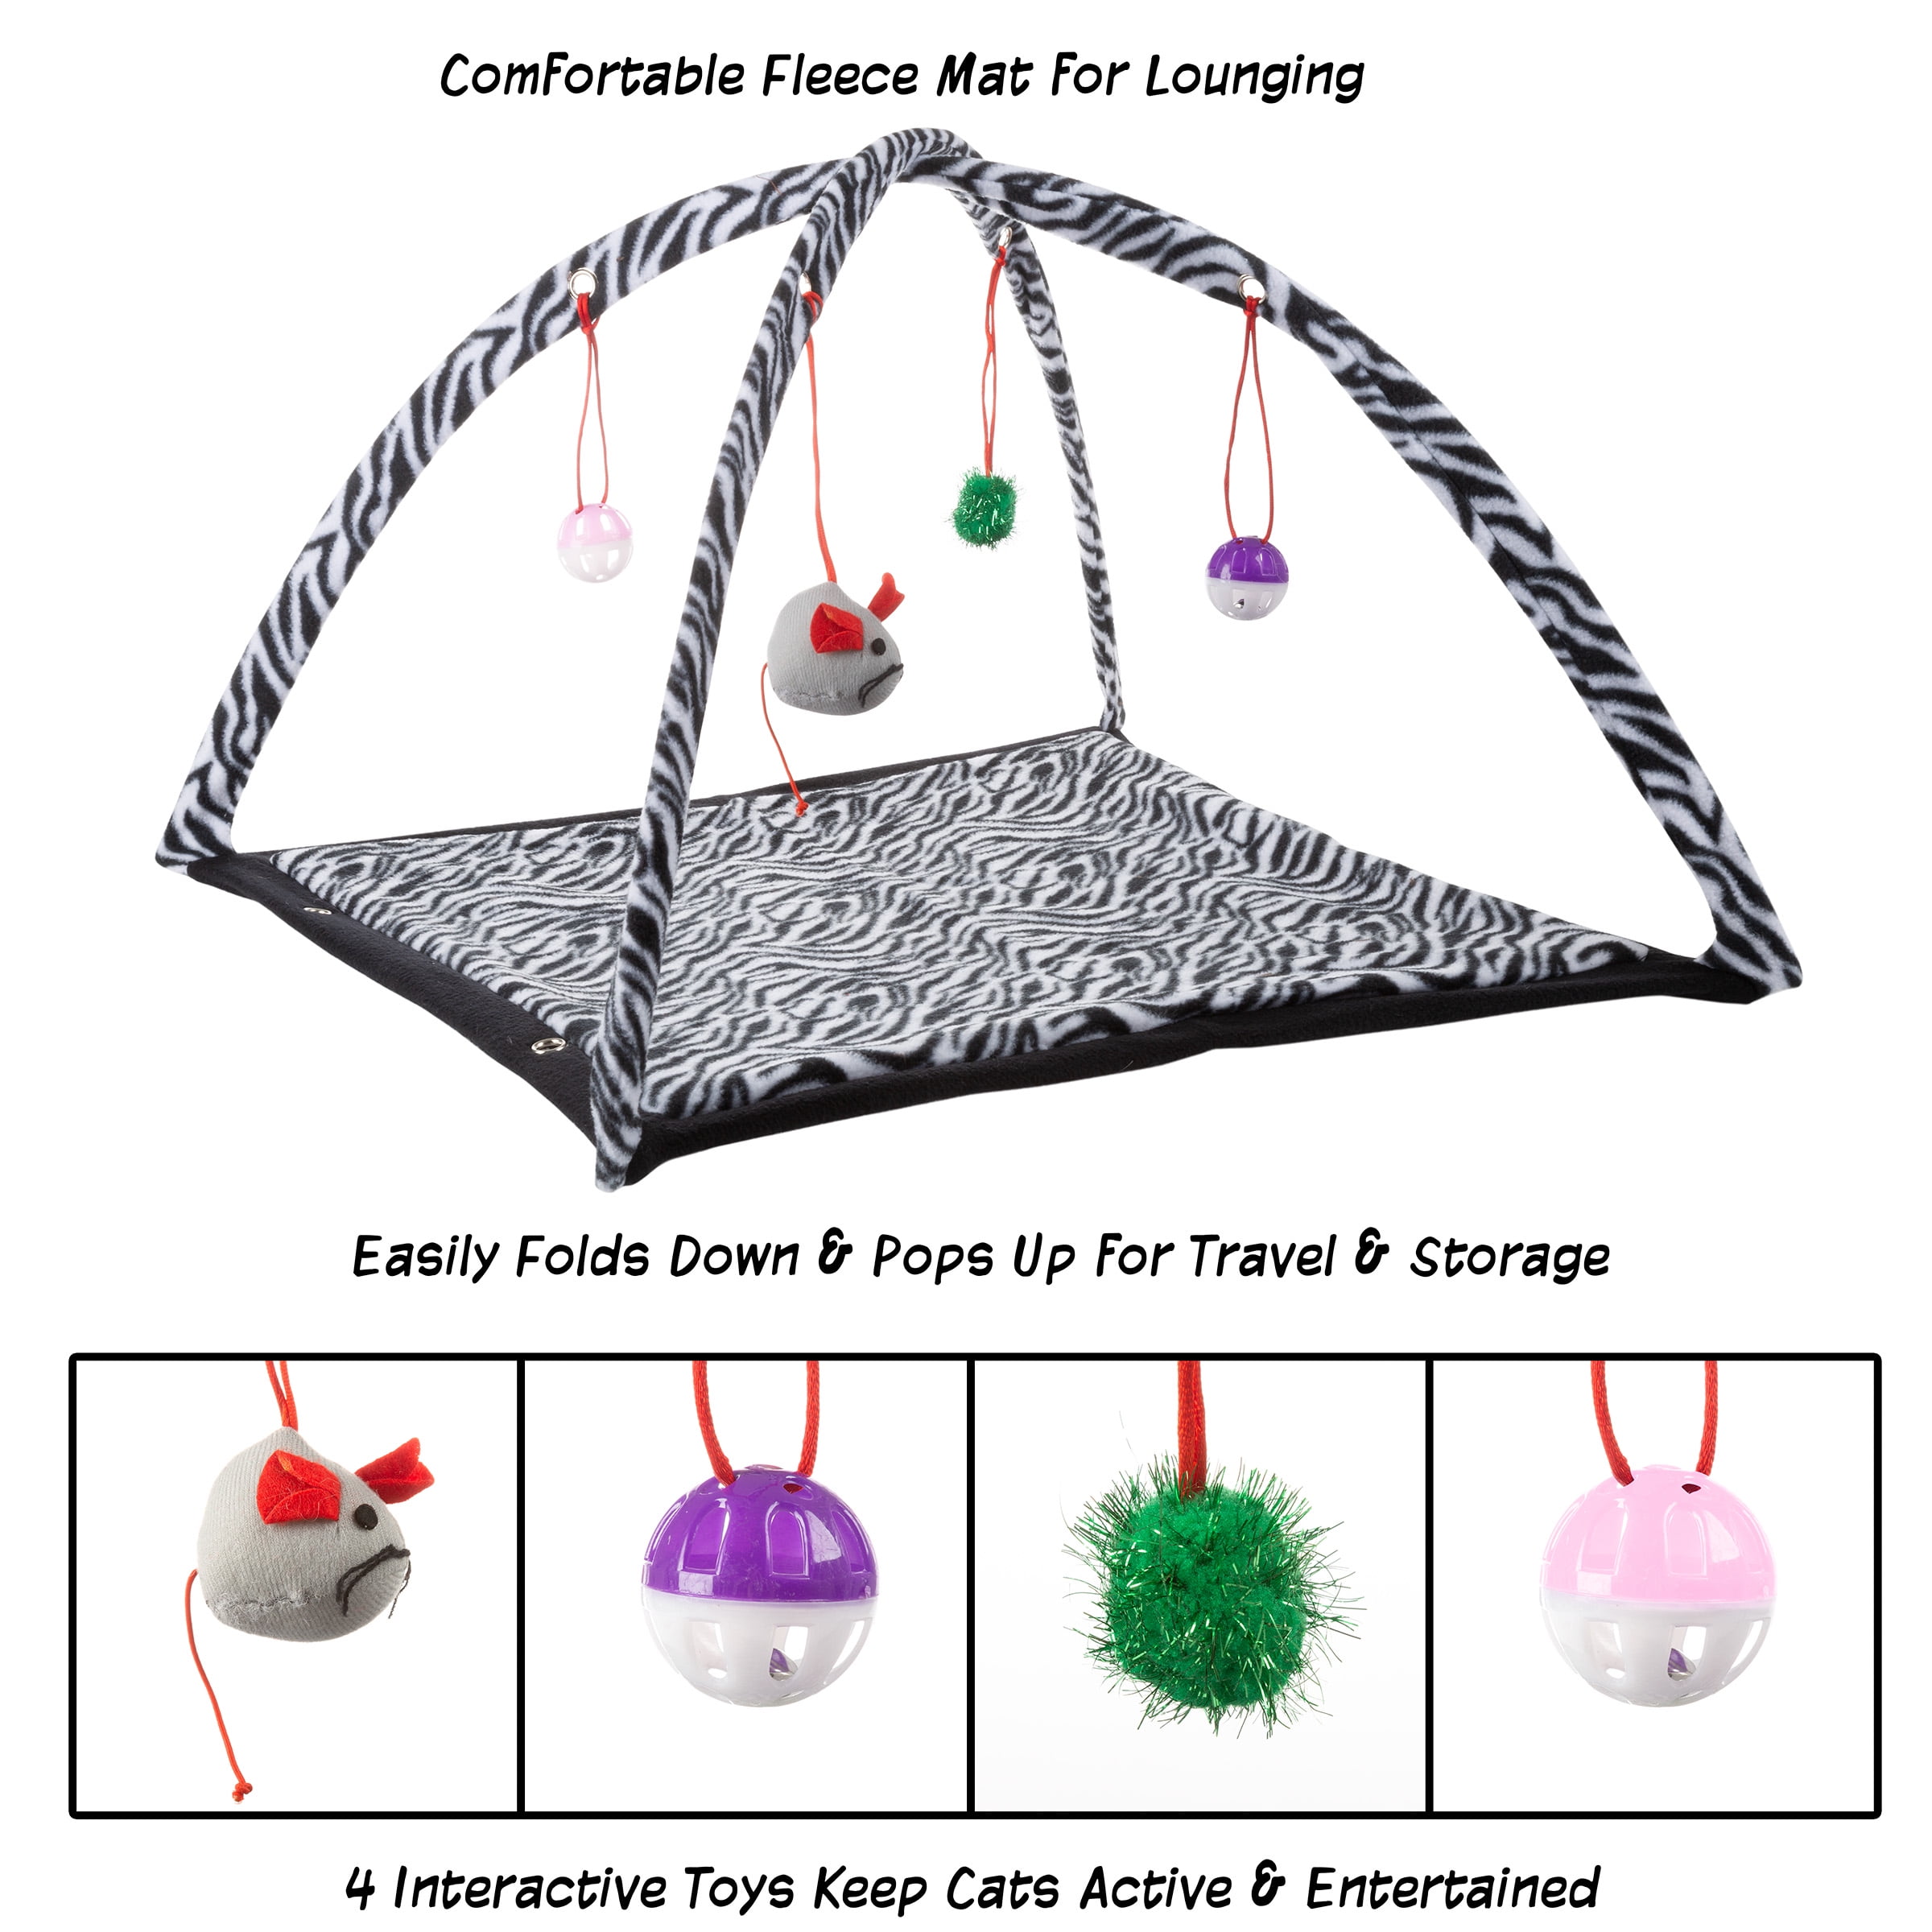 Cat Play Mat With Hanging Toys Activity Center For Bored Cats